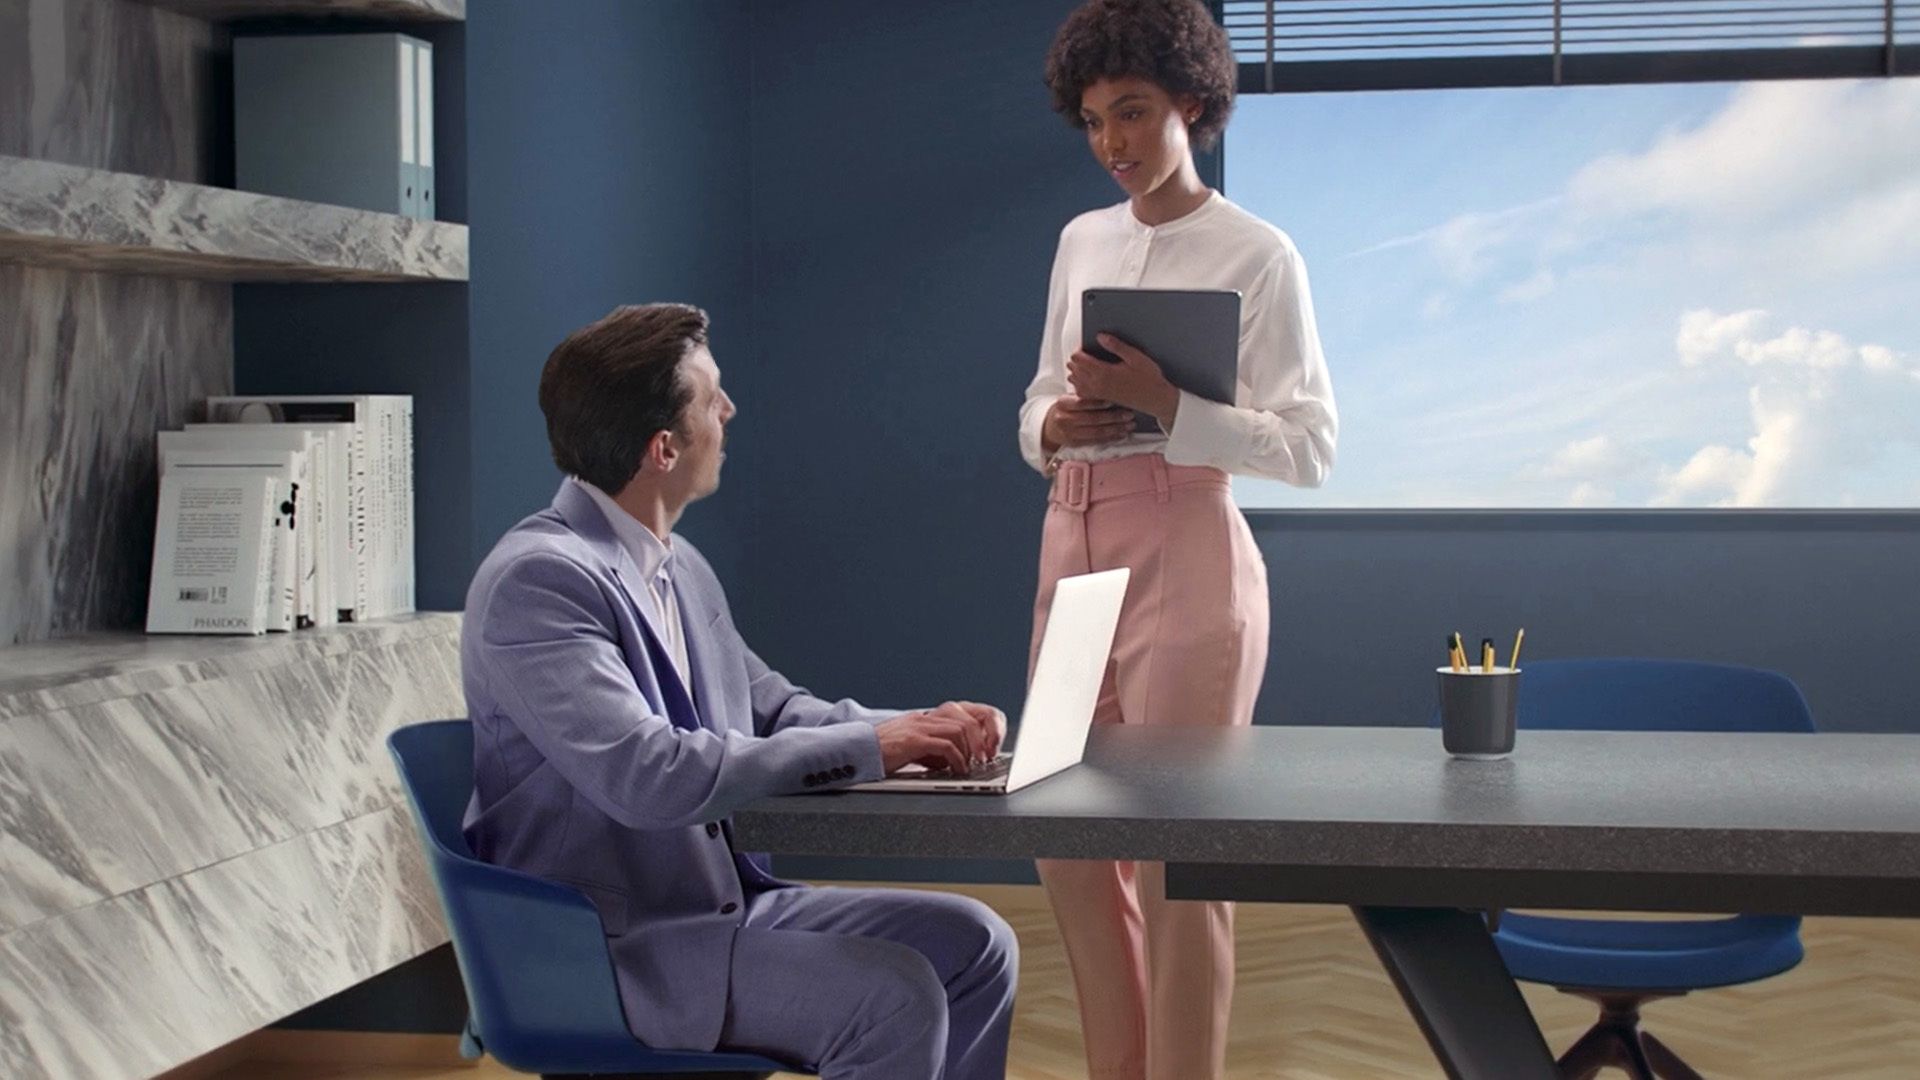 Two people sitting in a virtual 3d office